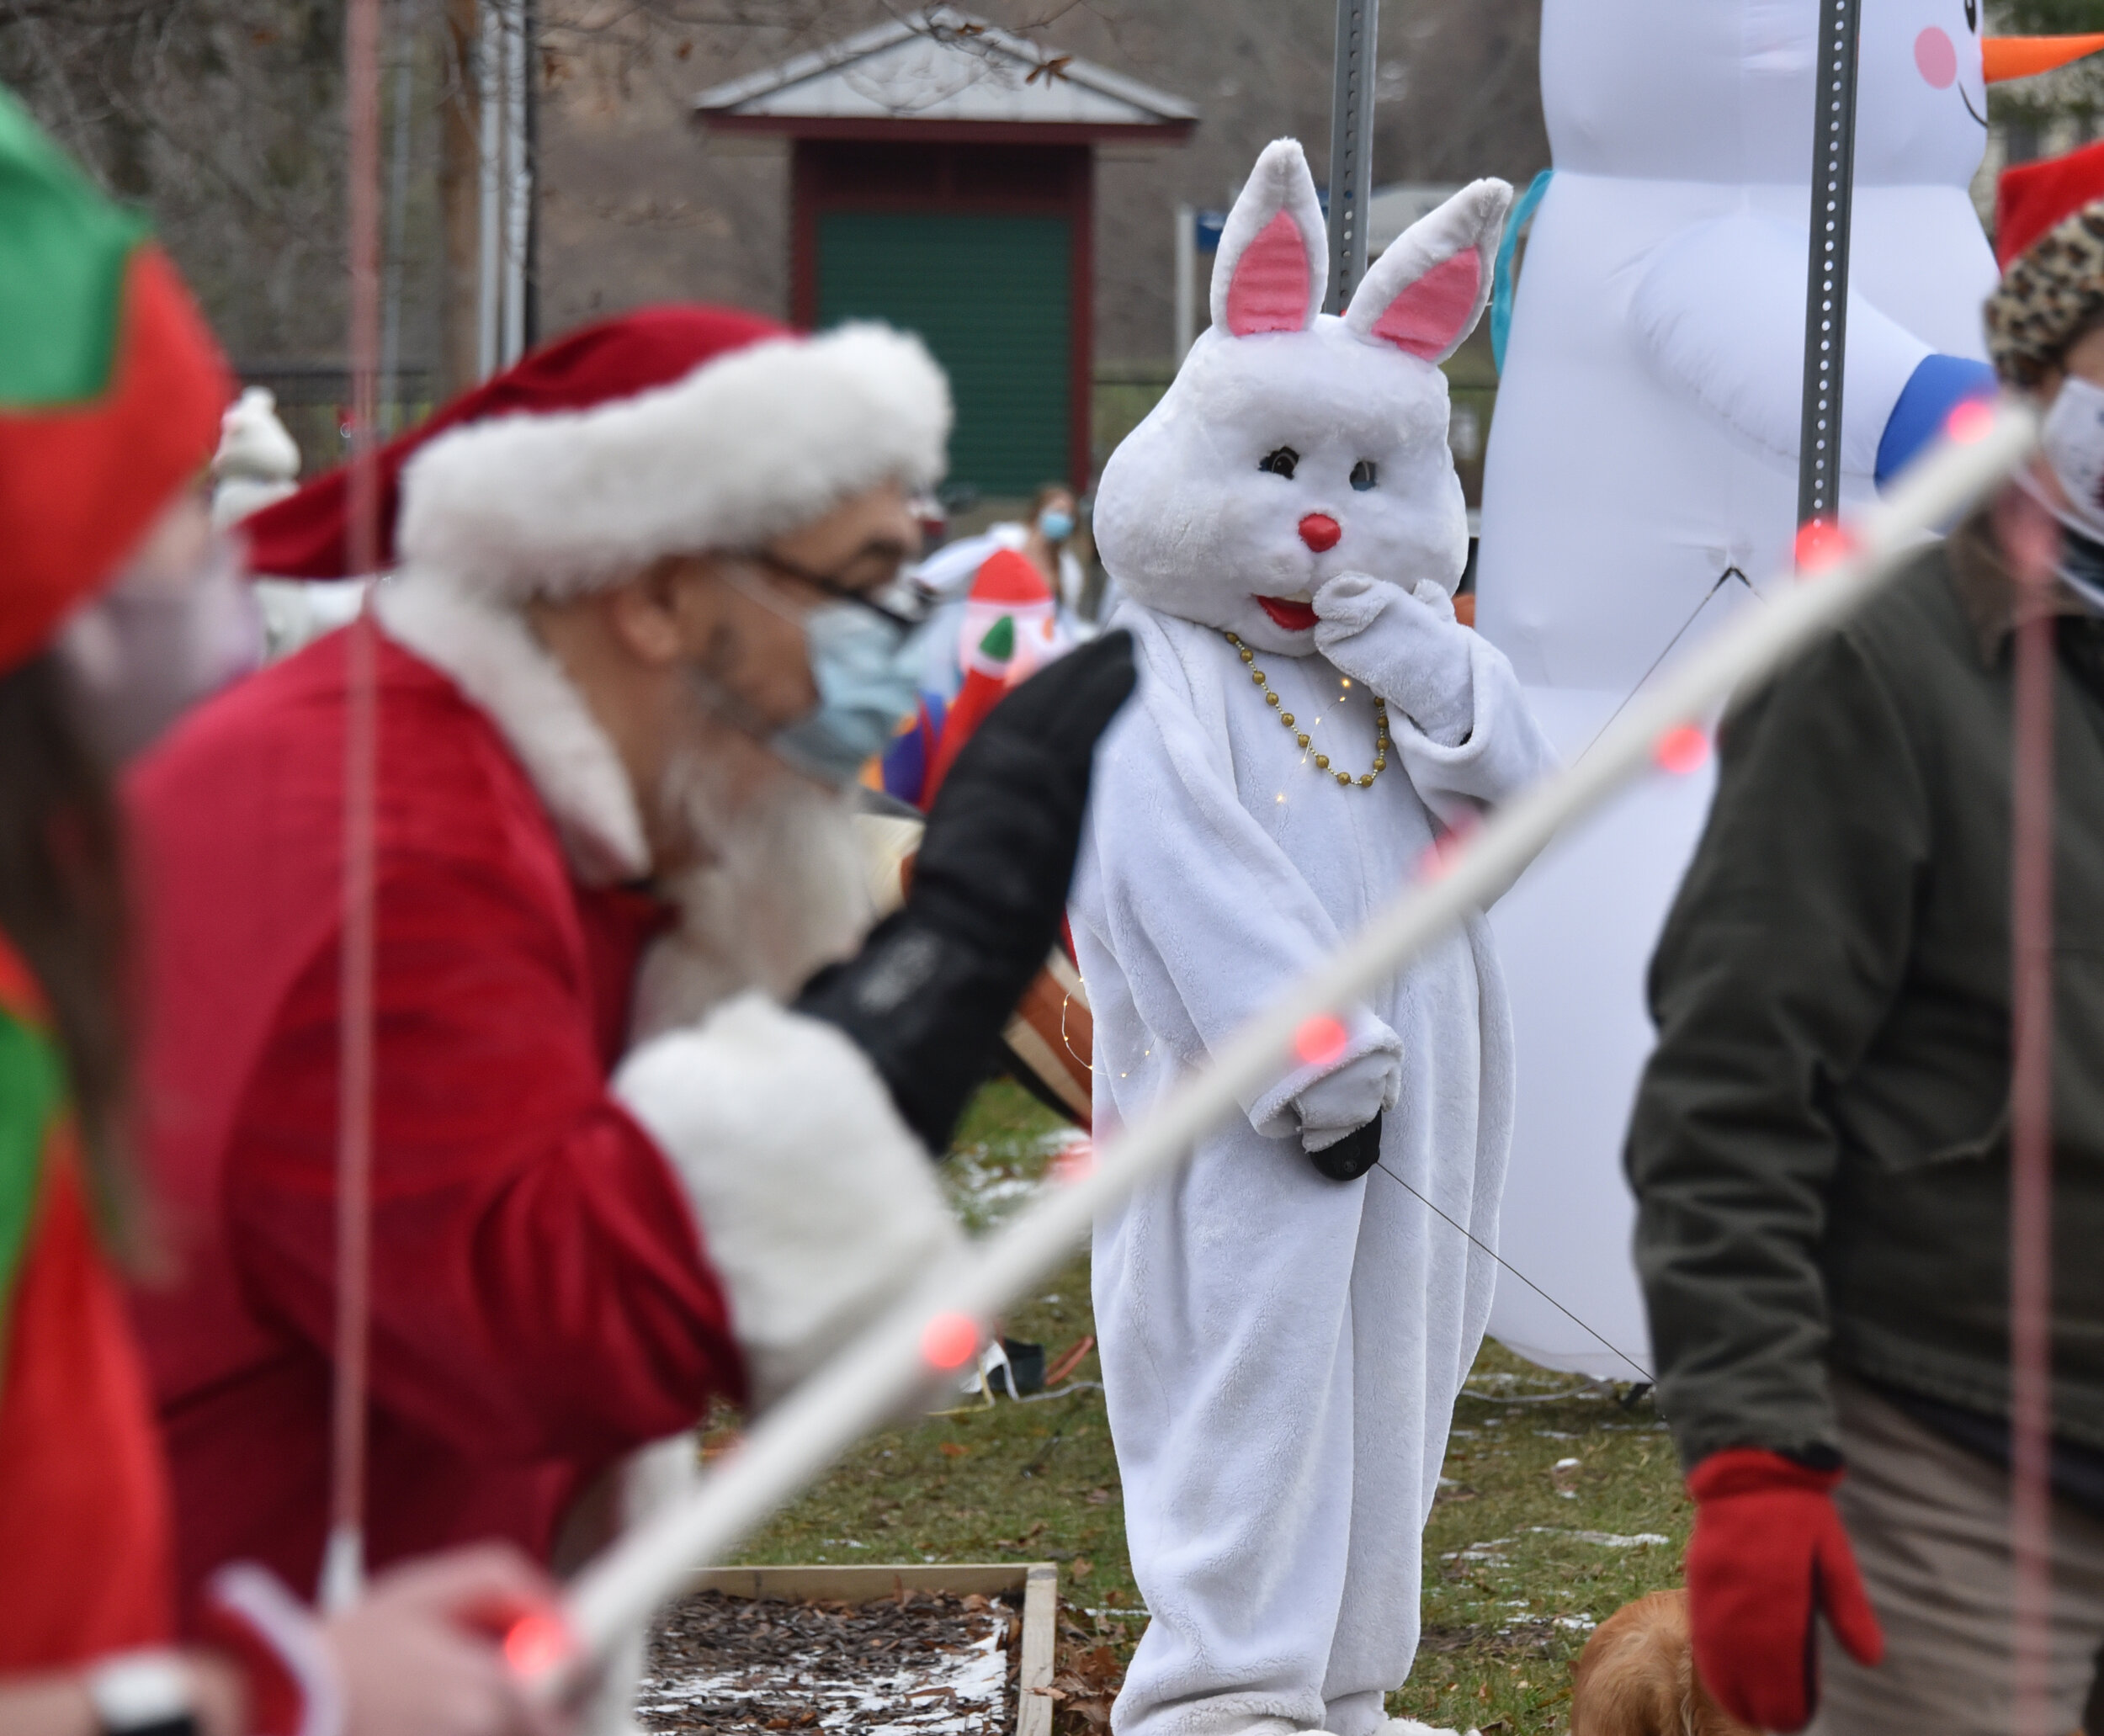   The Easter Bunny studies Santa's curbside appeal. Photo by Gordon Miller.  